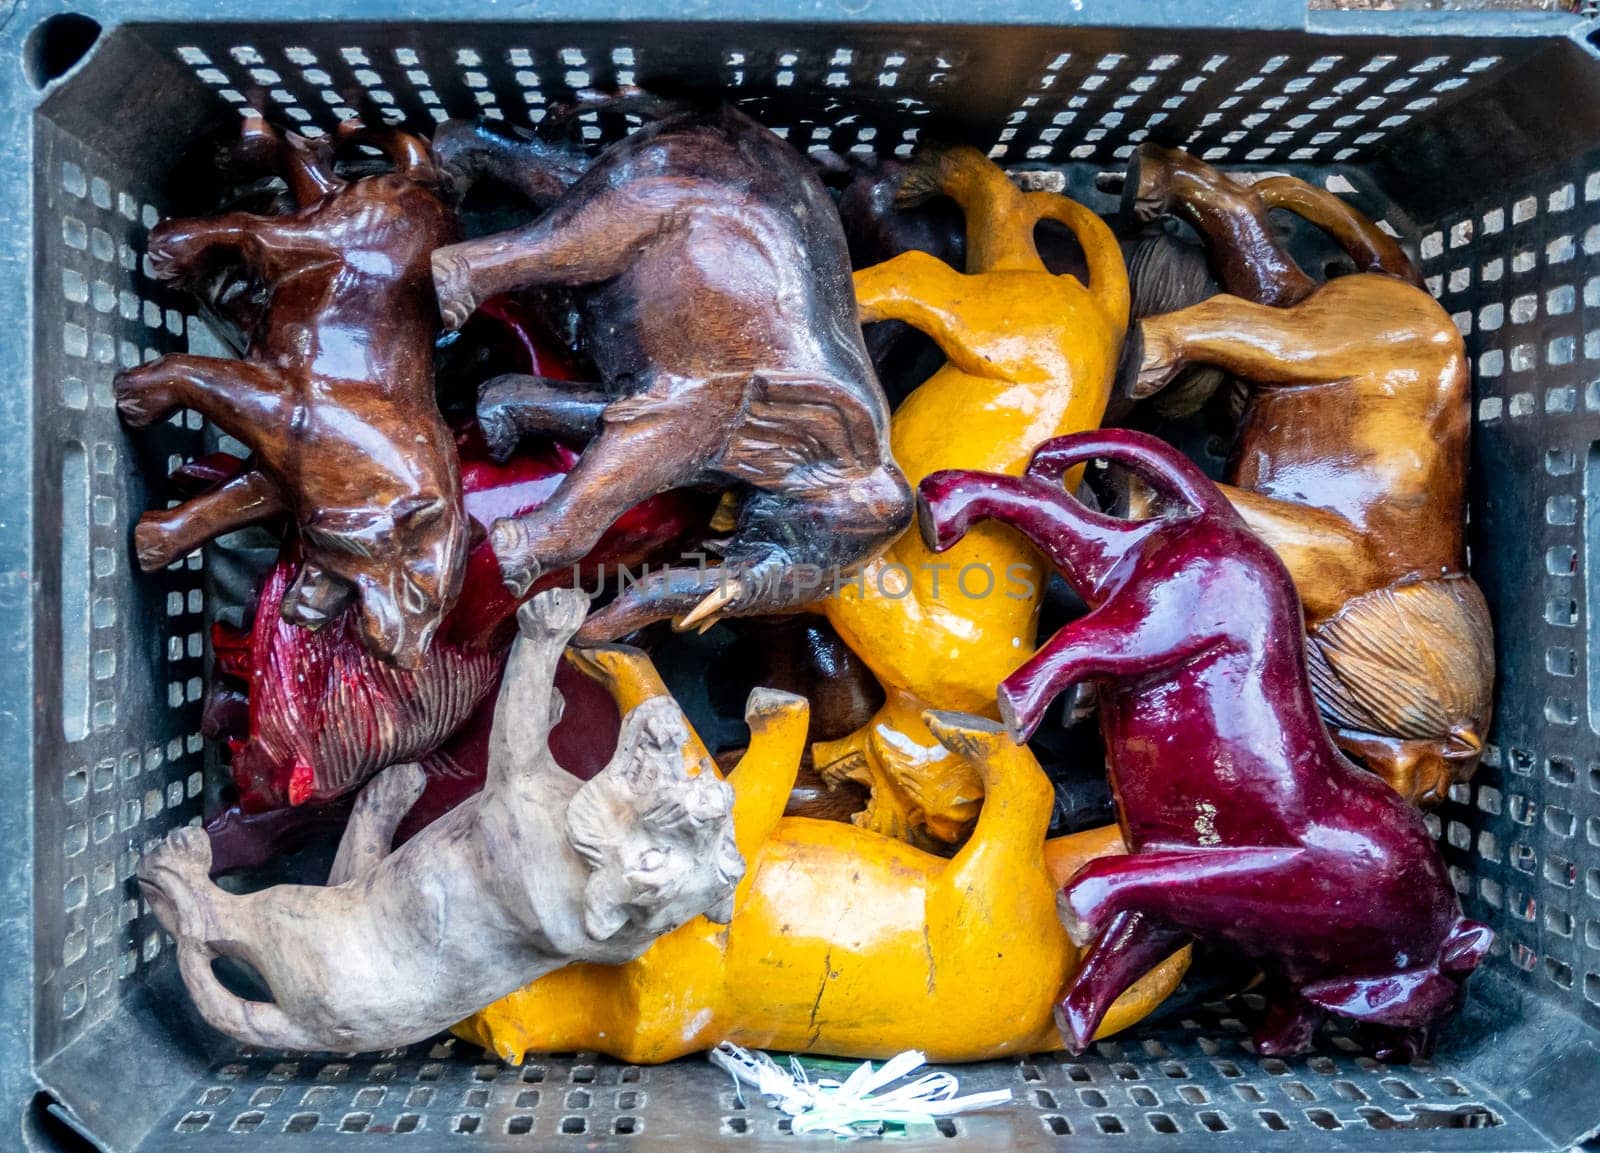 Wood carvings are various animal models. Sold in plastic baskets